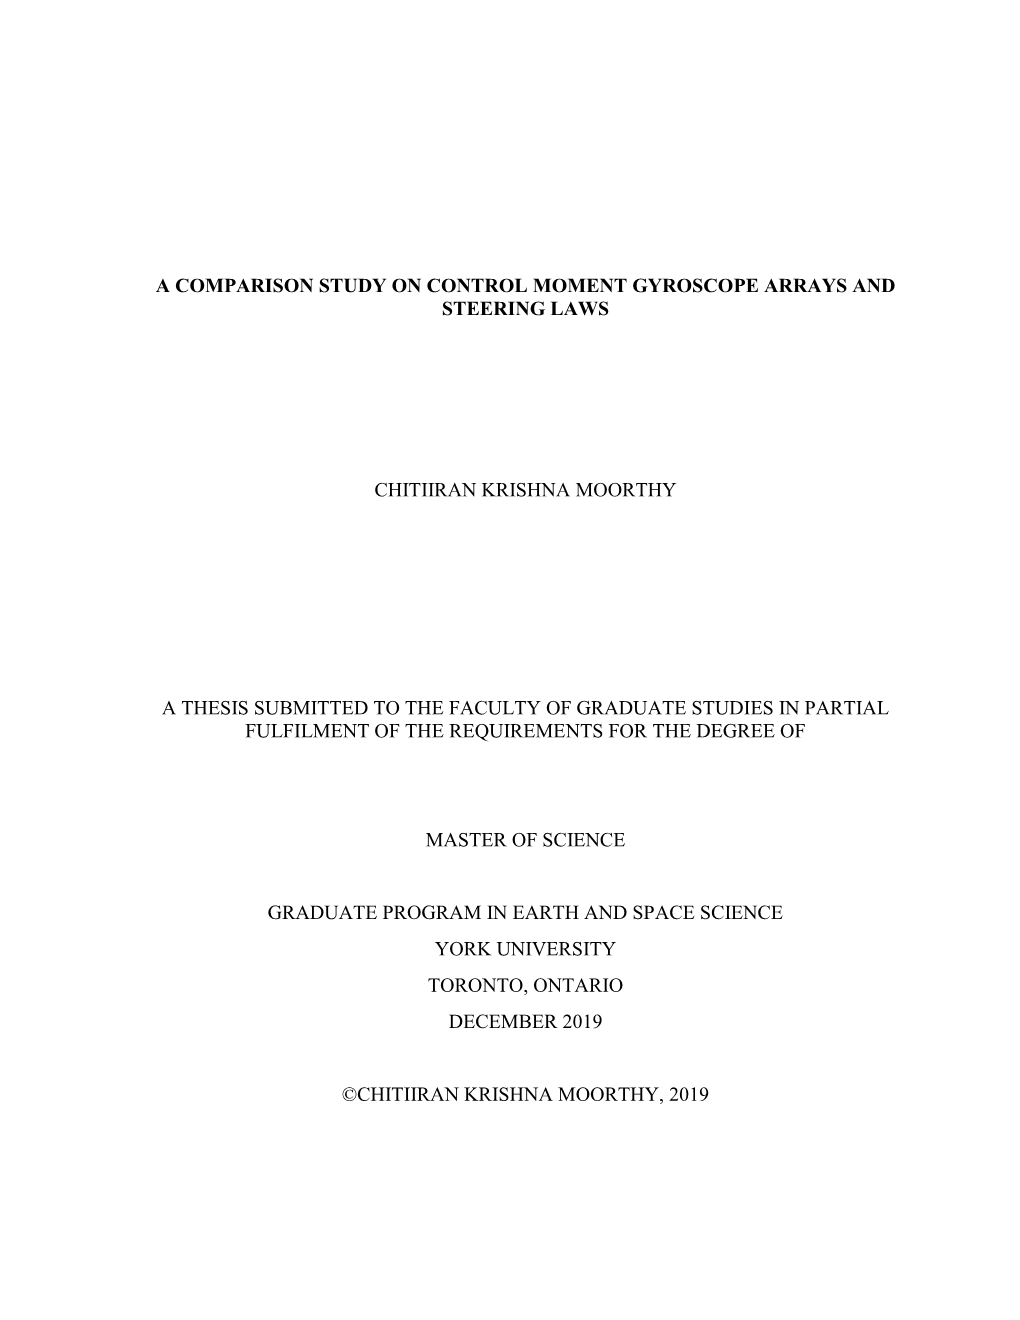 I a COMPARISON STUDY on CONTROL MOMENT GYROSCOPE ARRAYS and STEERING LAWS CHITIIRAN KRISHNA MOORTHY a THESIS SUBMITTED to the F